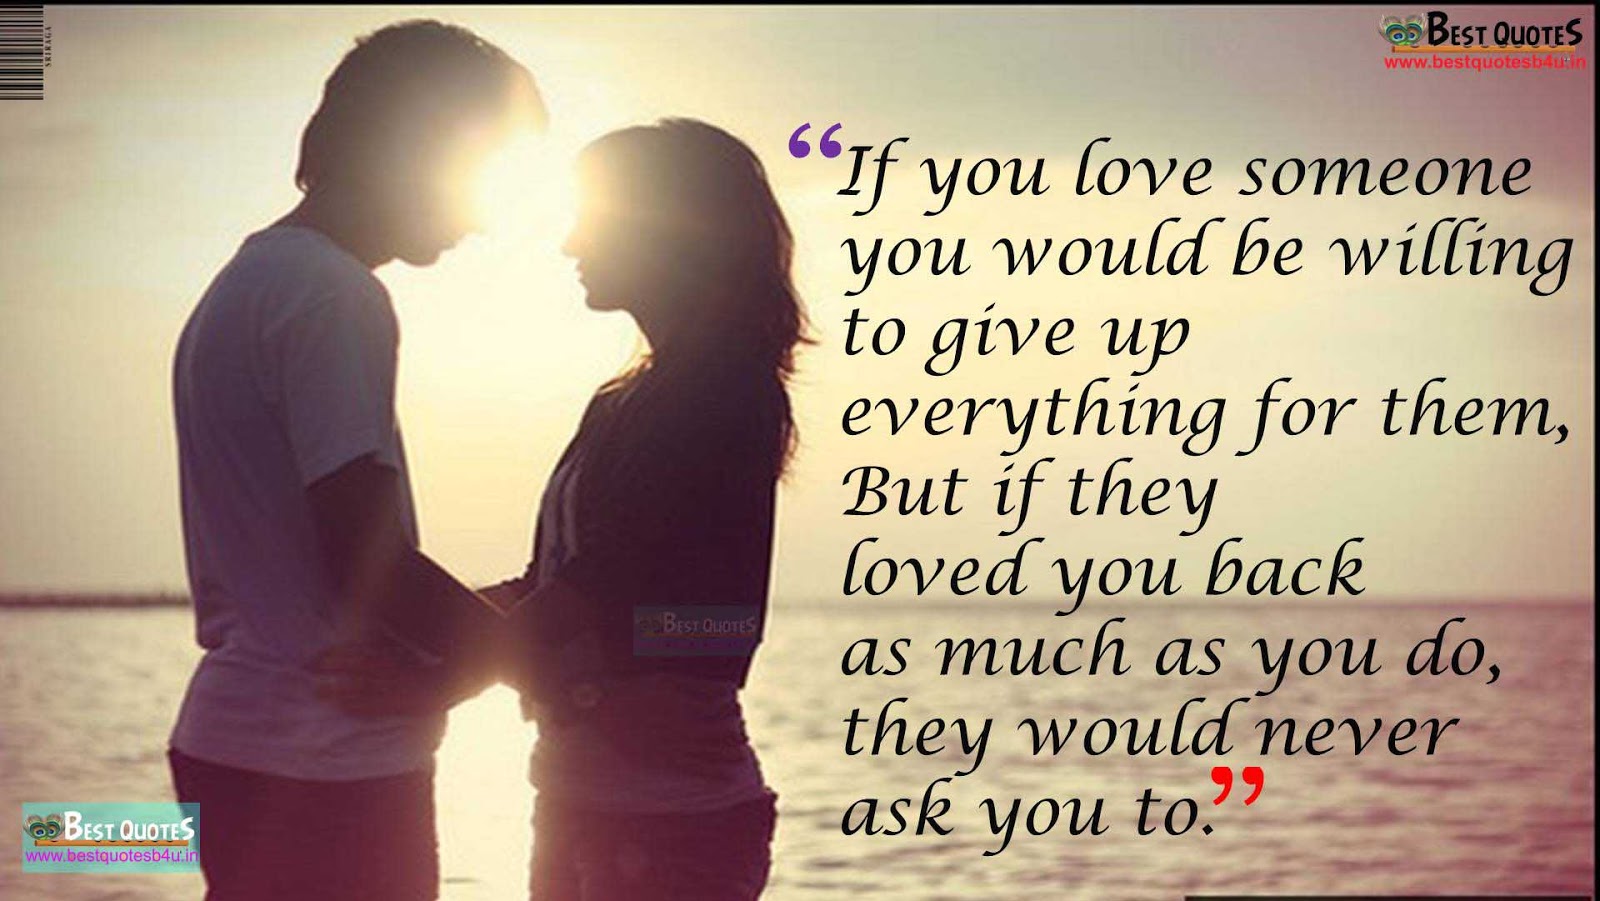 Heart touching love quotes 62 | Like Share Follow